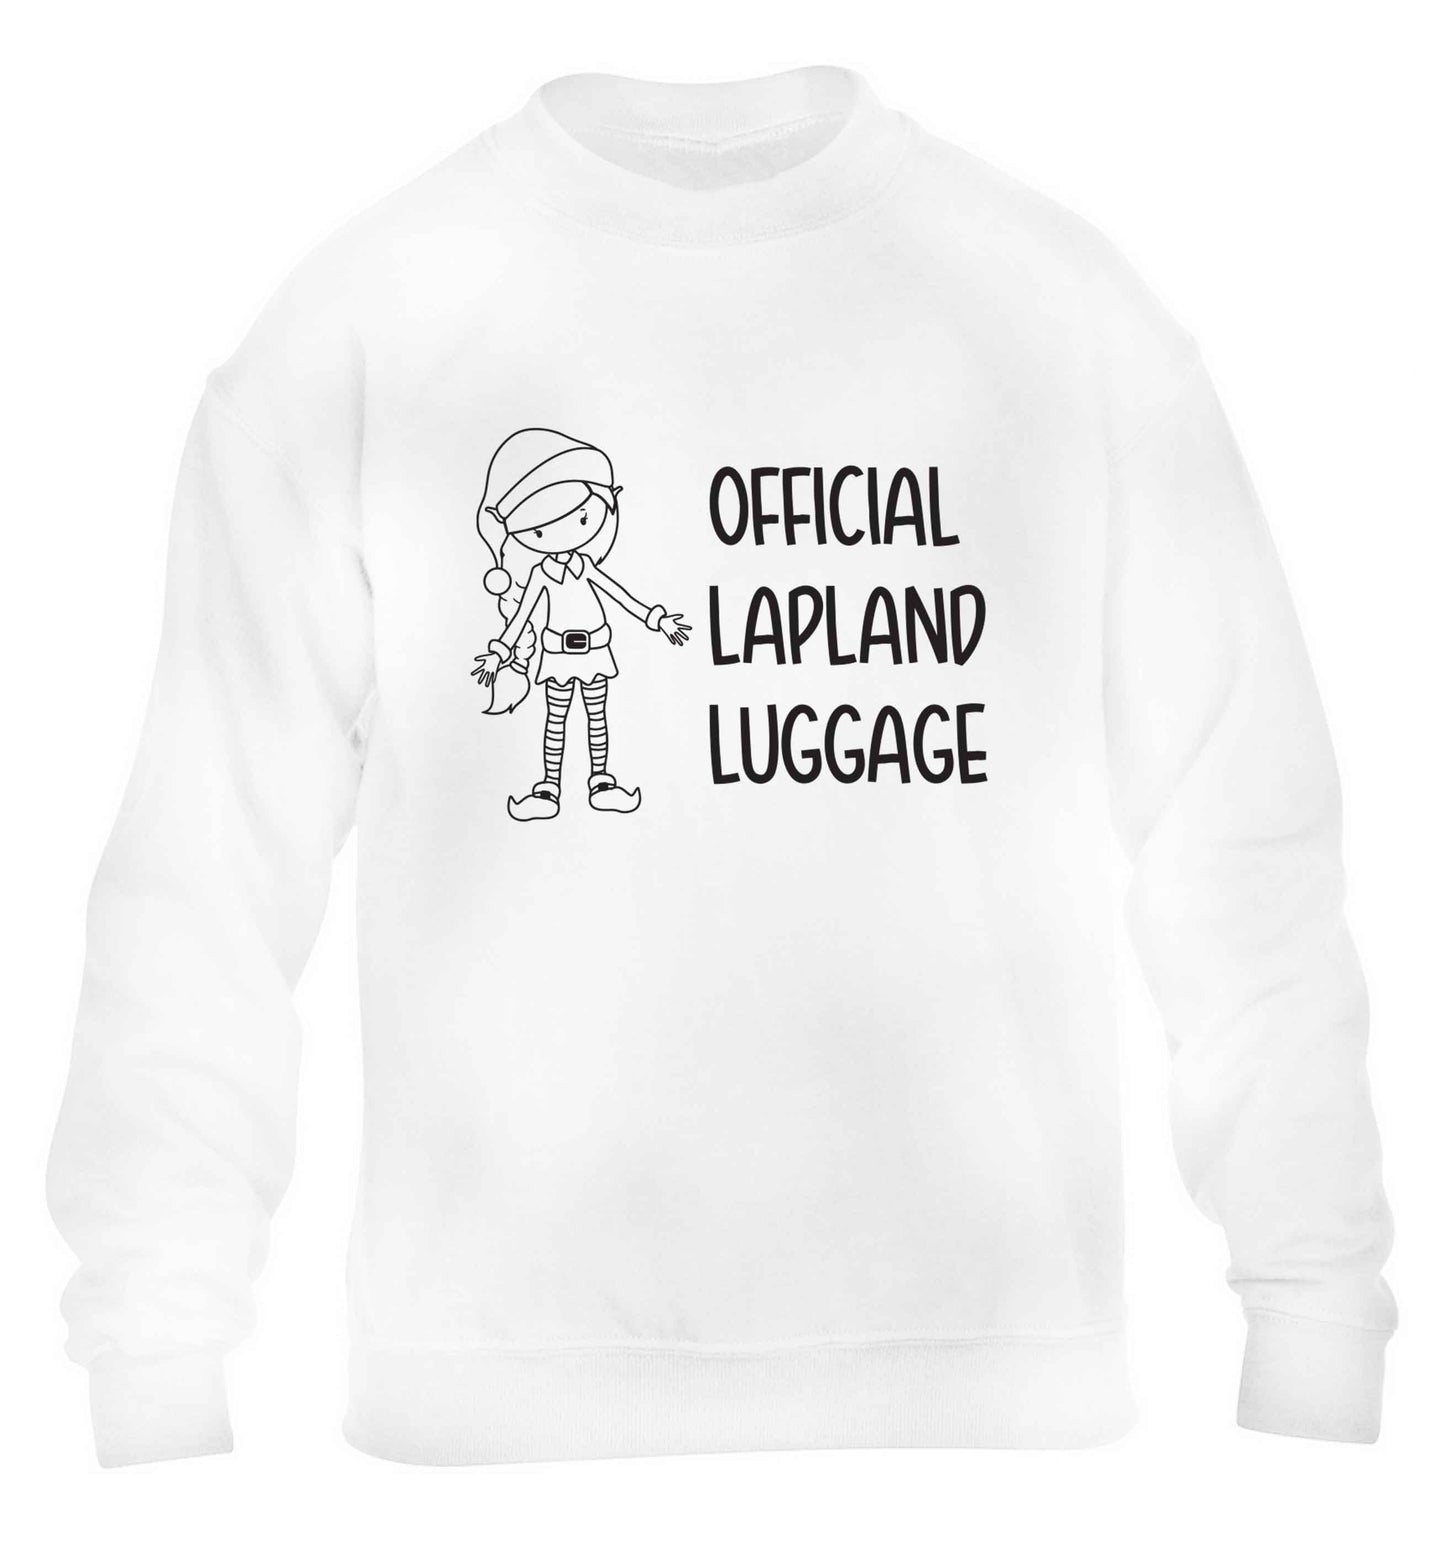 Official lapland luggage - Elf snowflake children's white sweater 12-13 Years